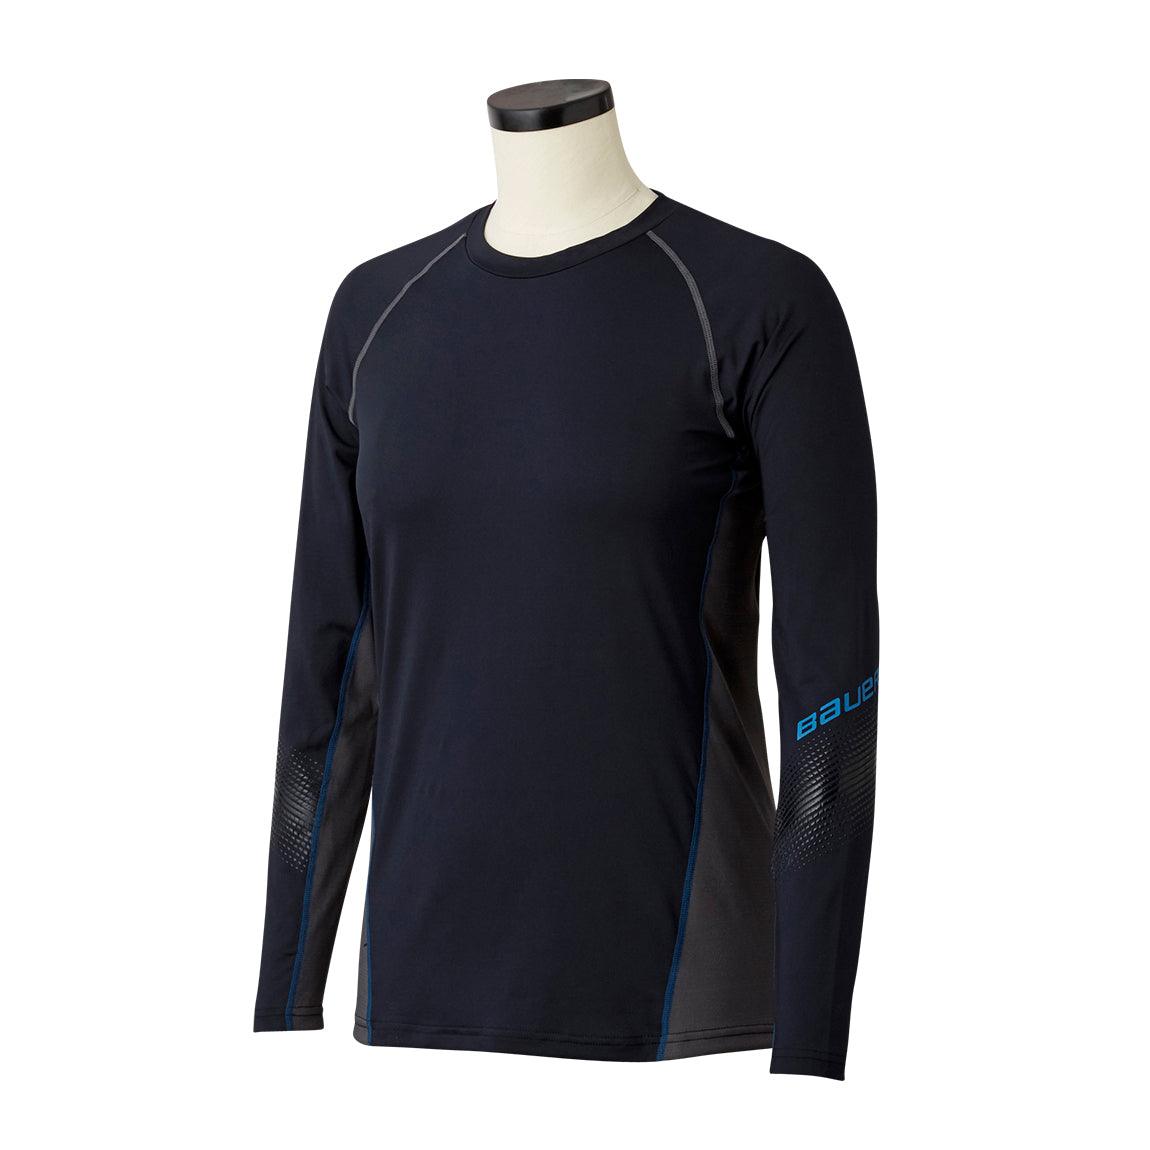 Women's Long Sleeve Top - Senior - Sports Excellence